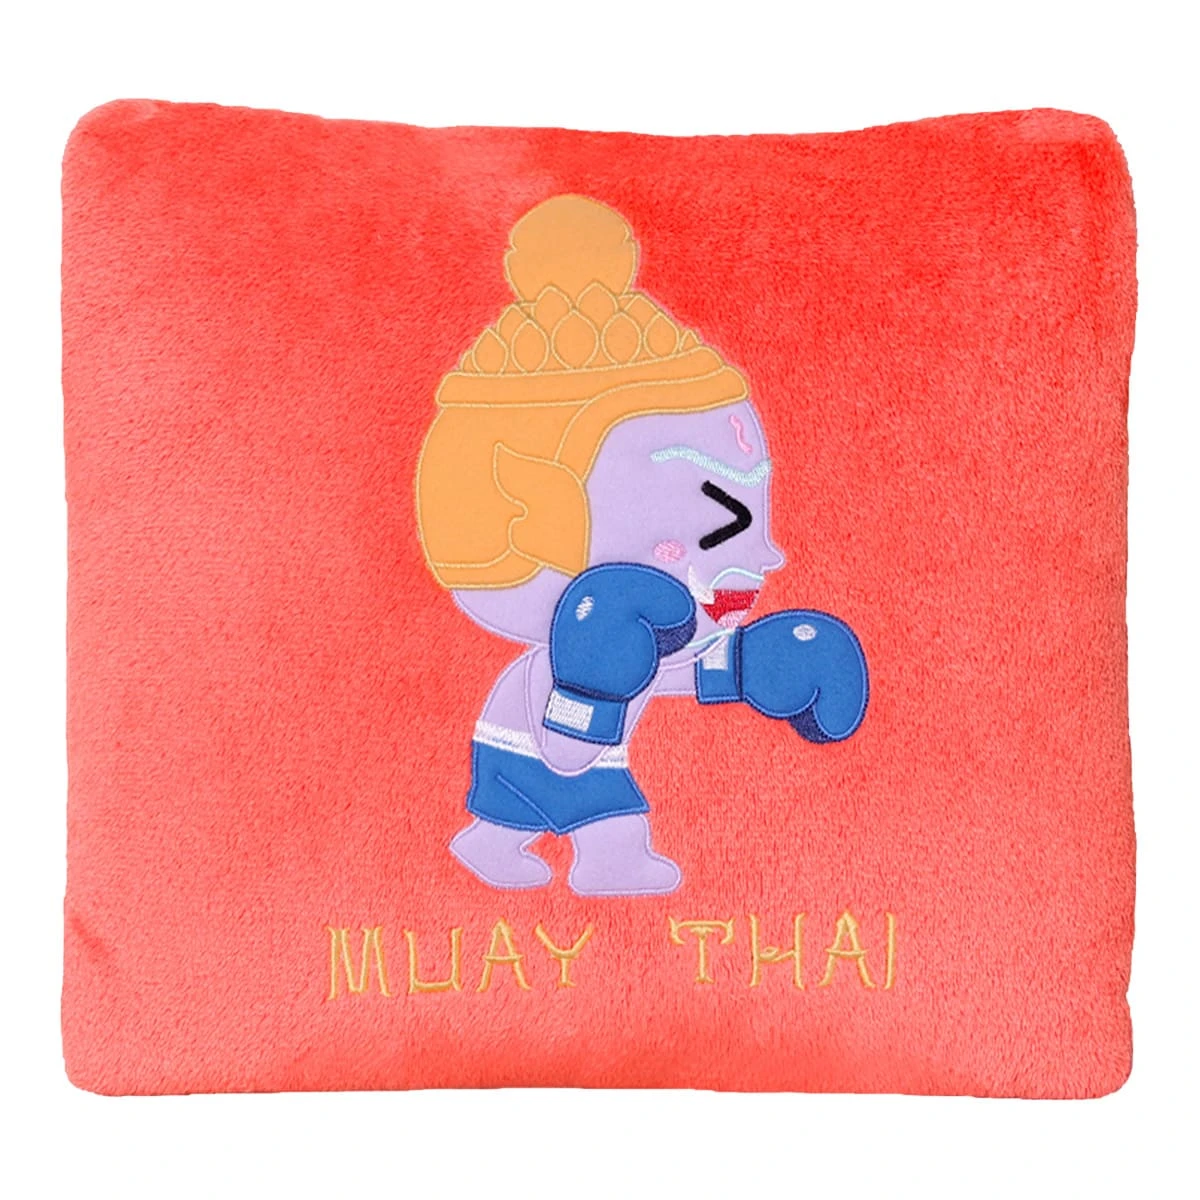 Recycled Polyester Muay Thai Giant Flannel Pillow Blanket (Old Rose)